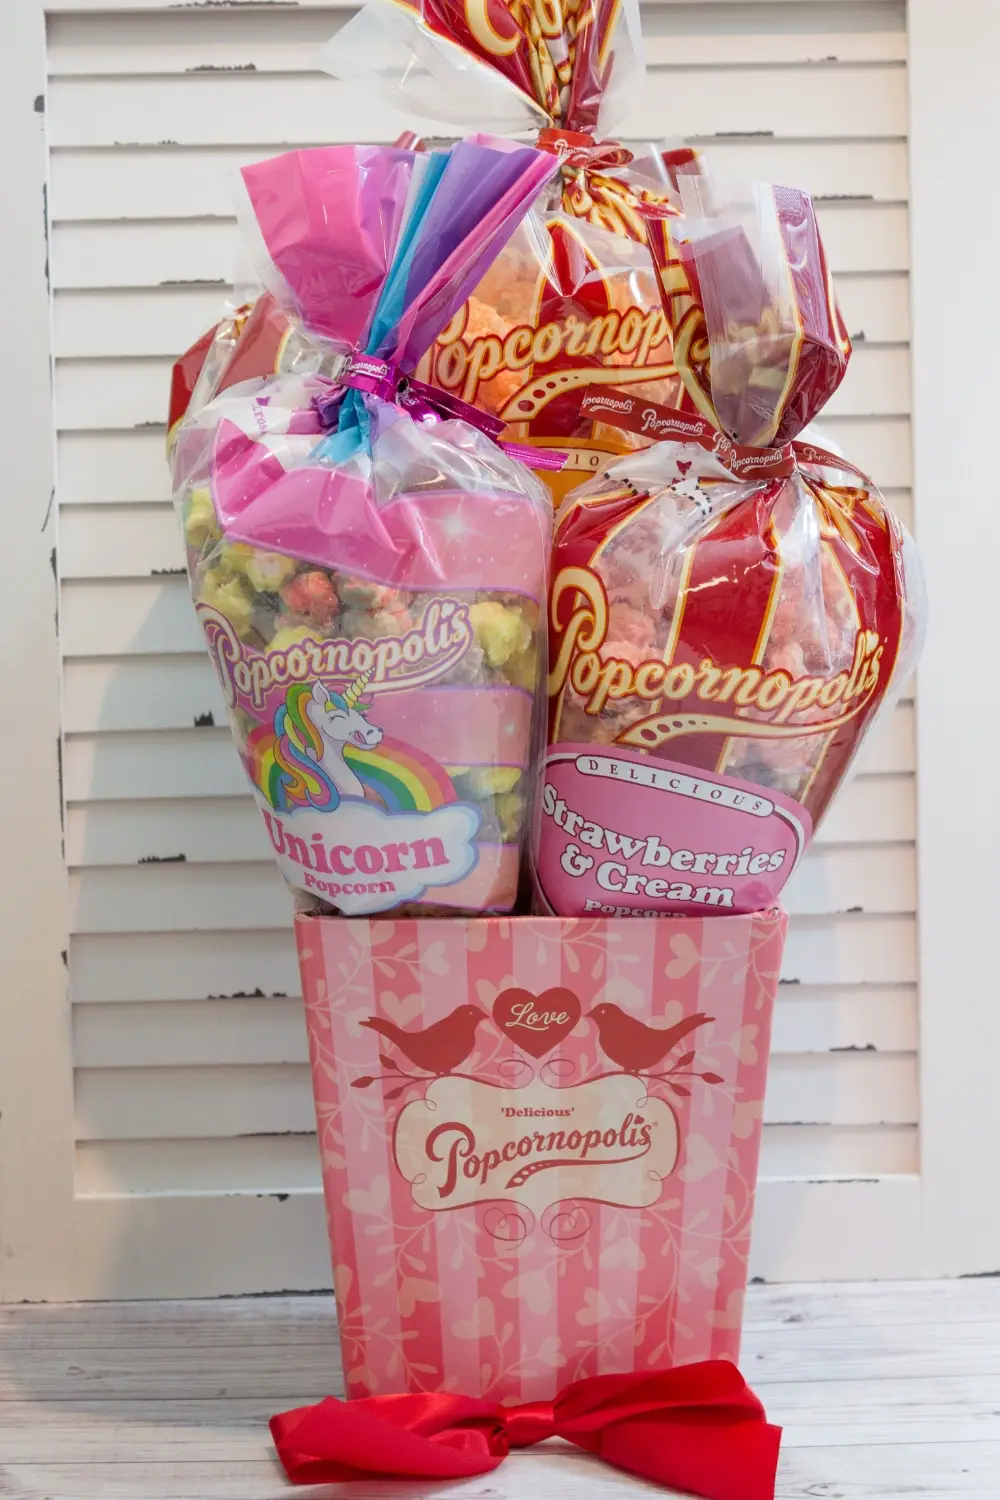 Give Them Something Different This Valentine’s Day: Popcornopolis